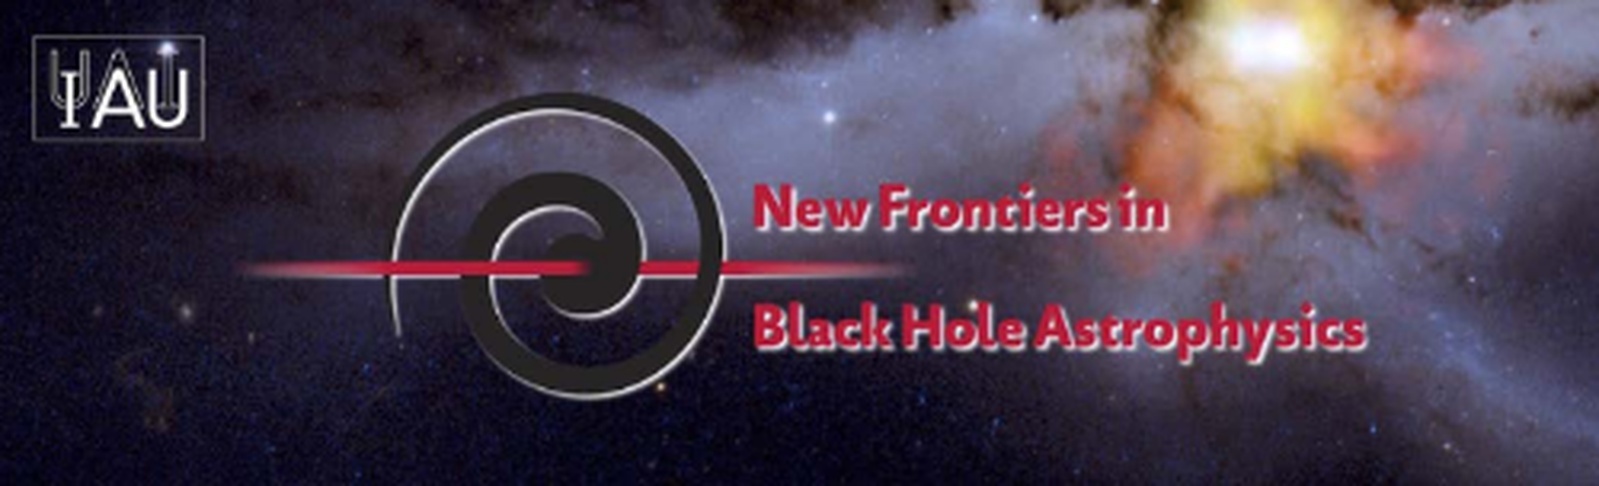 Mysteries of Black holes discussed at the first astronomical symposium in Slovenia